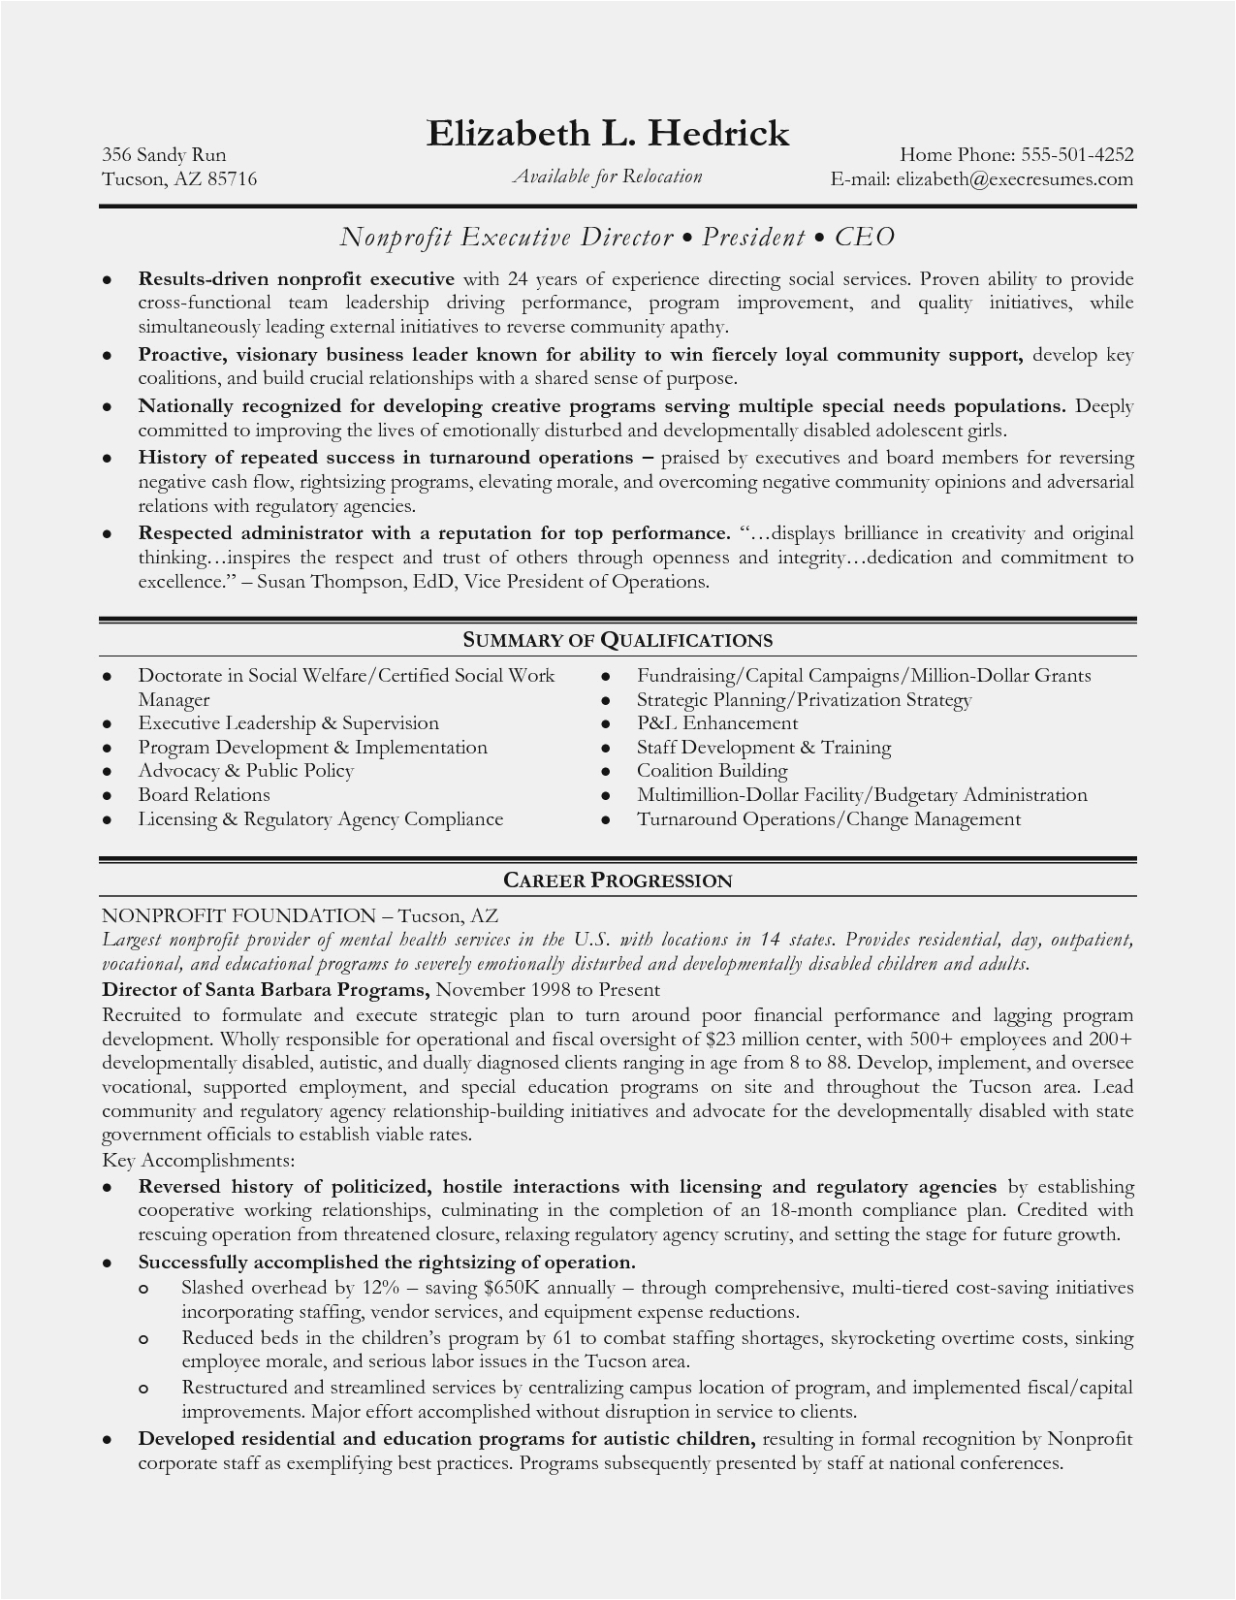 Sample Resume for Nonprofit Executive Director Seven Things You Probably Didn’t Know About Executive